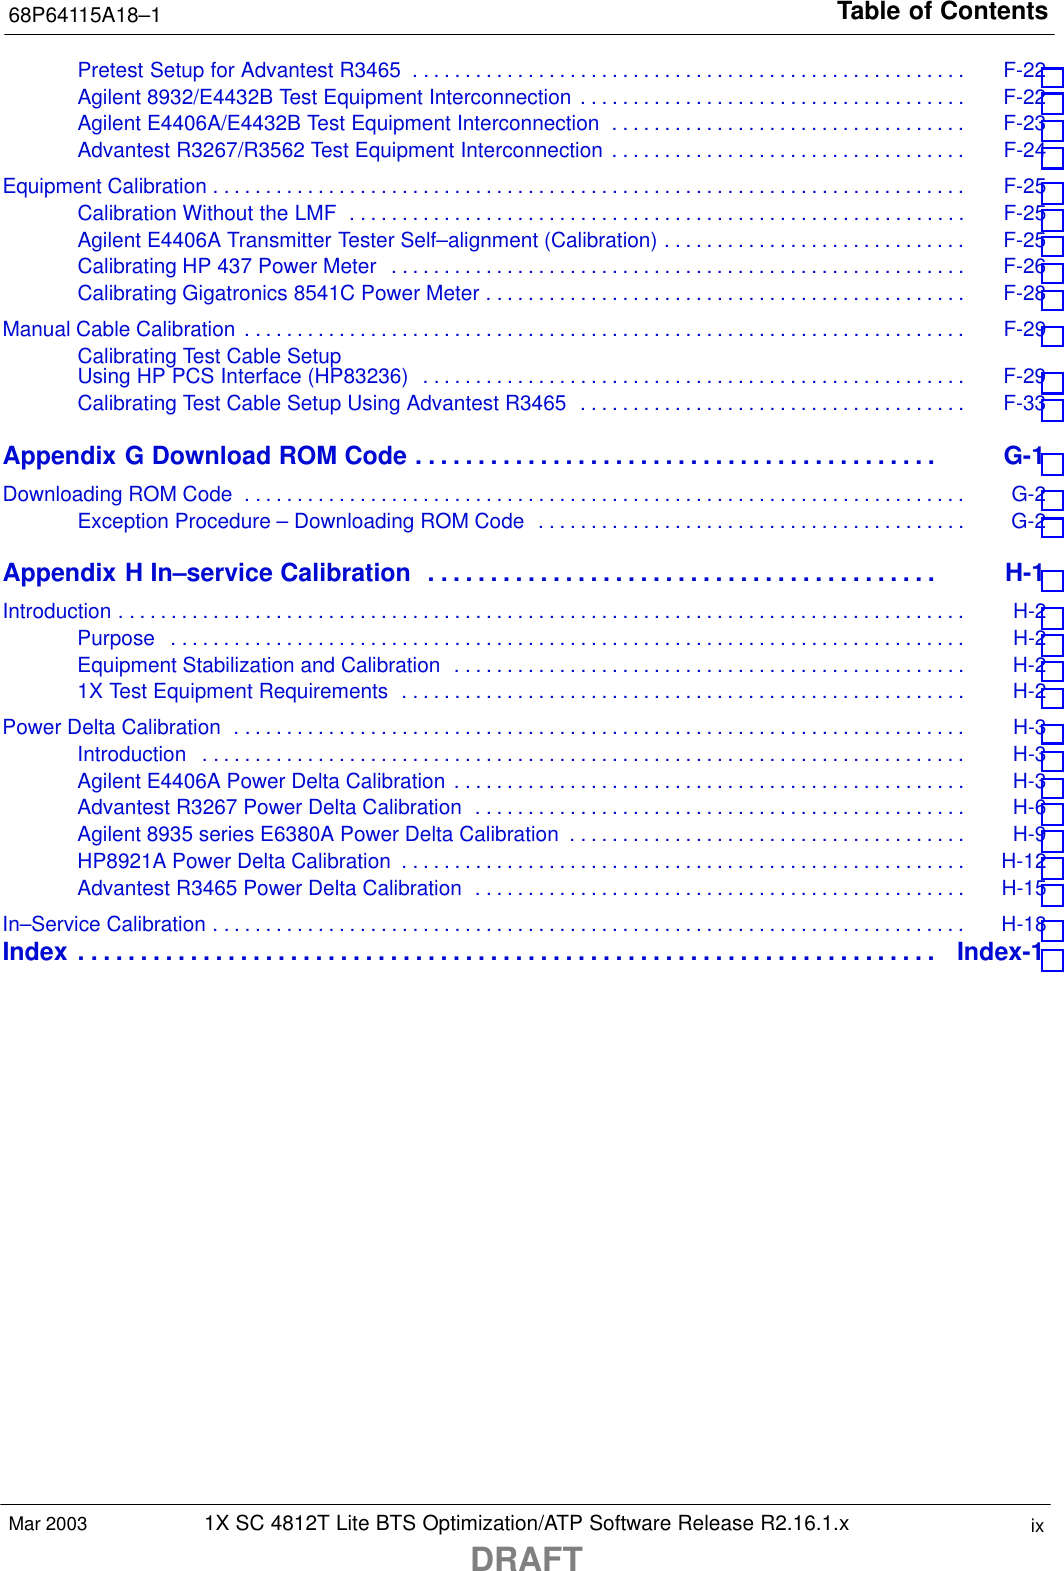 Table of Contents68P64115A18–11X SC 4812T Lite BTS Optimization/ATP Software Release R2.16.1.xDRAFTixMar 2003Pretest Setup for Advantest R3465 F-22 . . . . . . . . . . . . . . . . . . . . . . . . . . . . . . . . . . . . . . . . . . . . . . . . . . . . . Agilent 8932/E4432B Test Equipment Interconnection F-22 . . . . . . . . . . . . . . . . . . . . . . . . . . . . . . . . . . . . . Agilent E4406A/E4432B Test Equipment Interconnection F-23 . . . . . . . . . . . . . . . . . . . . . . . . . . . . . . . . . . Advantest R3267/R3562 Test Equipment Interconnection F-24 . . . . . . . . . . . . . . . . . . . . . . . . . . . . . . . . . . Equipment Calibration F-25 . . . . . . . . . . . . . . . . . . . . . . . . . . . . . . . . . . . . . . . . . . . . . . . . . . . . . . . . . . . . . . . . . . . . . . . . Calibration Without the LMF F-25 . . . . . . . . . . . . . . . . . . . . . . . . . . . . . . . . . . . . . . . . . . . . . . . . . . . . . . . . . . . Agilent E4406A Transmitter Tester Self–alignment (Calibration) F-25 . . . . . . . . . . . . . . . . . . . . . . . . . . . . . Calibrating HP 437 Power Meter F-26 . . . . . . . . . . . . . . . . . . . . . . . . . . . . . . . . . . . . . . . . . . . . . . . . . . . . . . . Calibrating Gigatronics 8541C Power Meter F-28 . . . . . . . . . . . . . . . . . . . . . . . . . . . . . . . . . . . . . . . . . . . . . . Manual Cable Calibration F-29 . . . . . . . . . . . . . . . . . . . . . . . . . . . . . . . . . . . . . . . . . . . . . . . . . . . . . . . . . . . . . . . . . . . . . Calibrating Test Cable SetupUsing HP PCS Interface (HP83236) F-29 . . . . . . . . . . . . . . . . . . . . . . . . . . . . . . . . . . . . . . . . . . . . . . . . . . . . Calibrating Test Cable Setup Using Advantest R3465 F-33 . . . . . . . . . . . . . . . . . . . . . . . . . . . . . . . . . . . . . Appendix G Download ROM Code G-1 . . . . . . . . . . . . . . . . . . . . . . . . . . . . . . . . . . . . . . . . . . Downloading ROM Code G-2 . . . . . . . . . . . . . . . . . . . . . . . . . . . . . . . . . . . . . . . . . . . . . . . . . . . . . . . . . . . . . . . . . . . . . Exception Procedure – Downloading ROM Code G-2 . . . . . . . . . . . . . . . . . . . . . . . . . . . . . . . . . . . . . . . . . Appendix H In–service Calibration H-1 . . . . . . . . . . . . . . . . . . . . . . . . . . . . . . . . . . . . . . . . . Introduction H-2 . . . . . . . . . . . . . . . . . . . . . . . . . . . . . . . . . . . . . . . . . . . . . . . . . . . . . . . . . . . . . . . . . . . . . . . . . . . . . . . . . Purpose H-2 . . . . . . . . . . . . . . . . . . . . . . . . . . . . . . . . . . . . . . . . . . . . . . . . . . . . . . . . . . . . . . . . . . . . . . . . . . . . Equipment Stabilization and Calibration H-2 . . . . . . . . . . . . . . . . . . . . . . . . . . . . . . . . . . . . . . . . . . . . . . . . . 1X Test Equipment Requirements H-2 . . . . . . . . . . . . . . . . . . . . . . . . . . . . . . . . . . . . . . . . . . . . . . . . . . . . . . Power Delta Calibration H-3 . . . . . . . . . . . . . . . . . . . . . . . . . . . . . . . . . . . . . . . . . . . . . . . . . . . . . . . . . . . . . . . . . . . . . . Introduction H-3 . . . . . . . . . . . . . . . . . . . . . . . . . . . . . . . . . . . . . . . . . . . . . . . . . . . . . . . . . . . . . . . . . . . . . . . . . Agilent E4406A Power Delta Calibration H-3 . . . . . . . . . . . . . . . . . . . . . . . . . . . . . . . . . . . . . . . . . . . . . . . . . Advantest R3267 Power Delta Calibration H-6 . . . . . . . . . . . . . . . . . . . . . . . . . . . . . . . . . . . . . . . . . . . . . . . Agilent 8935 series E6380A Power Delta Calibration H-9 . . . . . . . . . . . . . . . . . . . . . . . . . . . . . . . . . . . . . . HP8921A Power Delta Calibration H-12 . . . . . . . . . . . . . . . . . . . . . . . . . . . . . . . . . . . . . . . . . . . . . . . . . . . . . . Advantest R3465 Power Delta Calibration H-15 . . . . . . . . . . . . . . . . . . . . . . . . . . . . . . . . . . . . . . . . . . . . . . . In–Service Calibration H-18 . . . . . . . . . . . . . . . . . . . . . . . . . . . . . . . . . . . . . . . . . . . . . . . . . . . . . . . . . . . . . . . . . . . . . . . . Index Index-1 . . . . . . . . . . . . . . . . . . . . . . . . . . . . . . . . . . . . . . . . . . . . . . . . . . . . . . . . . . . . . . . . . . . . . 